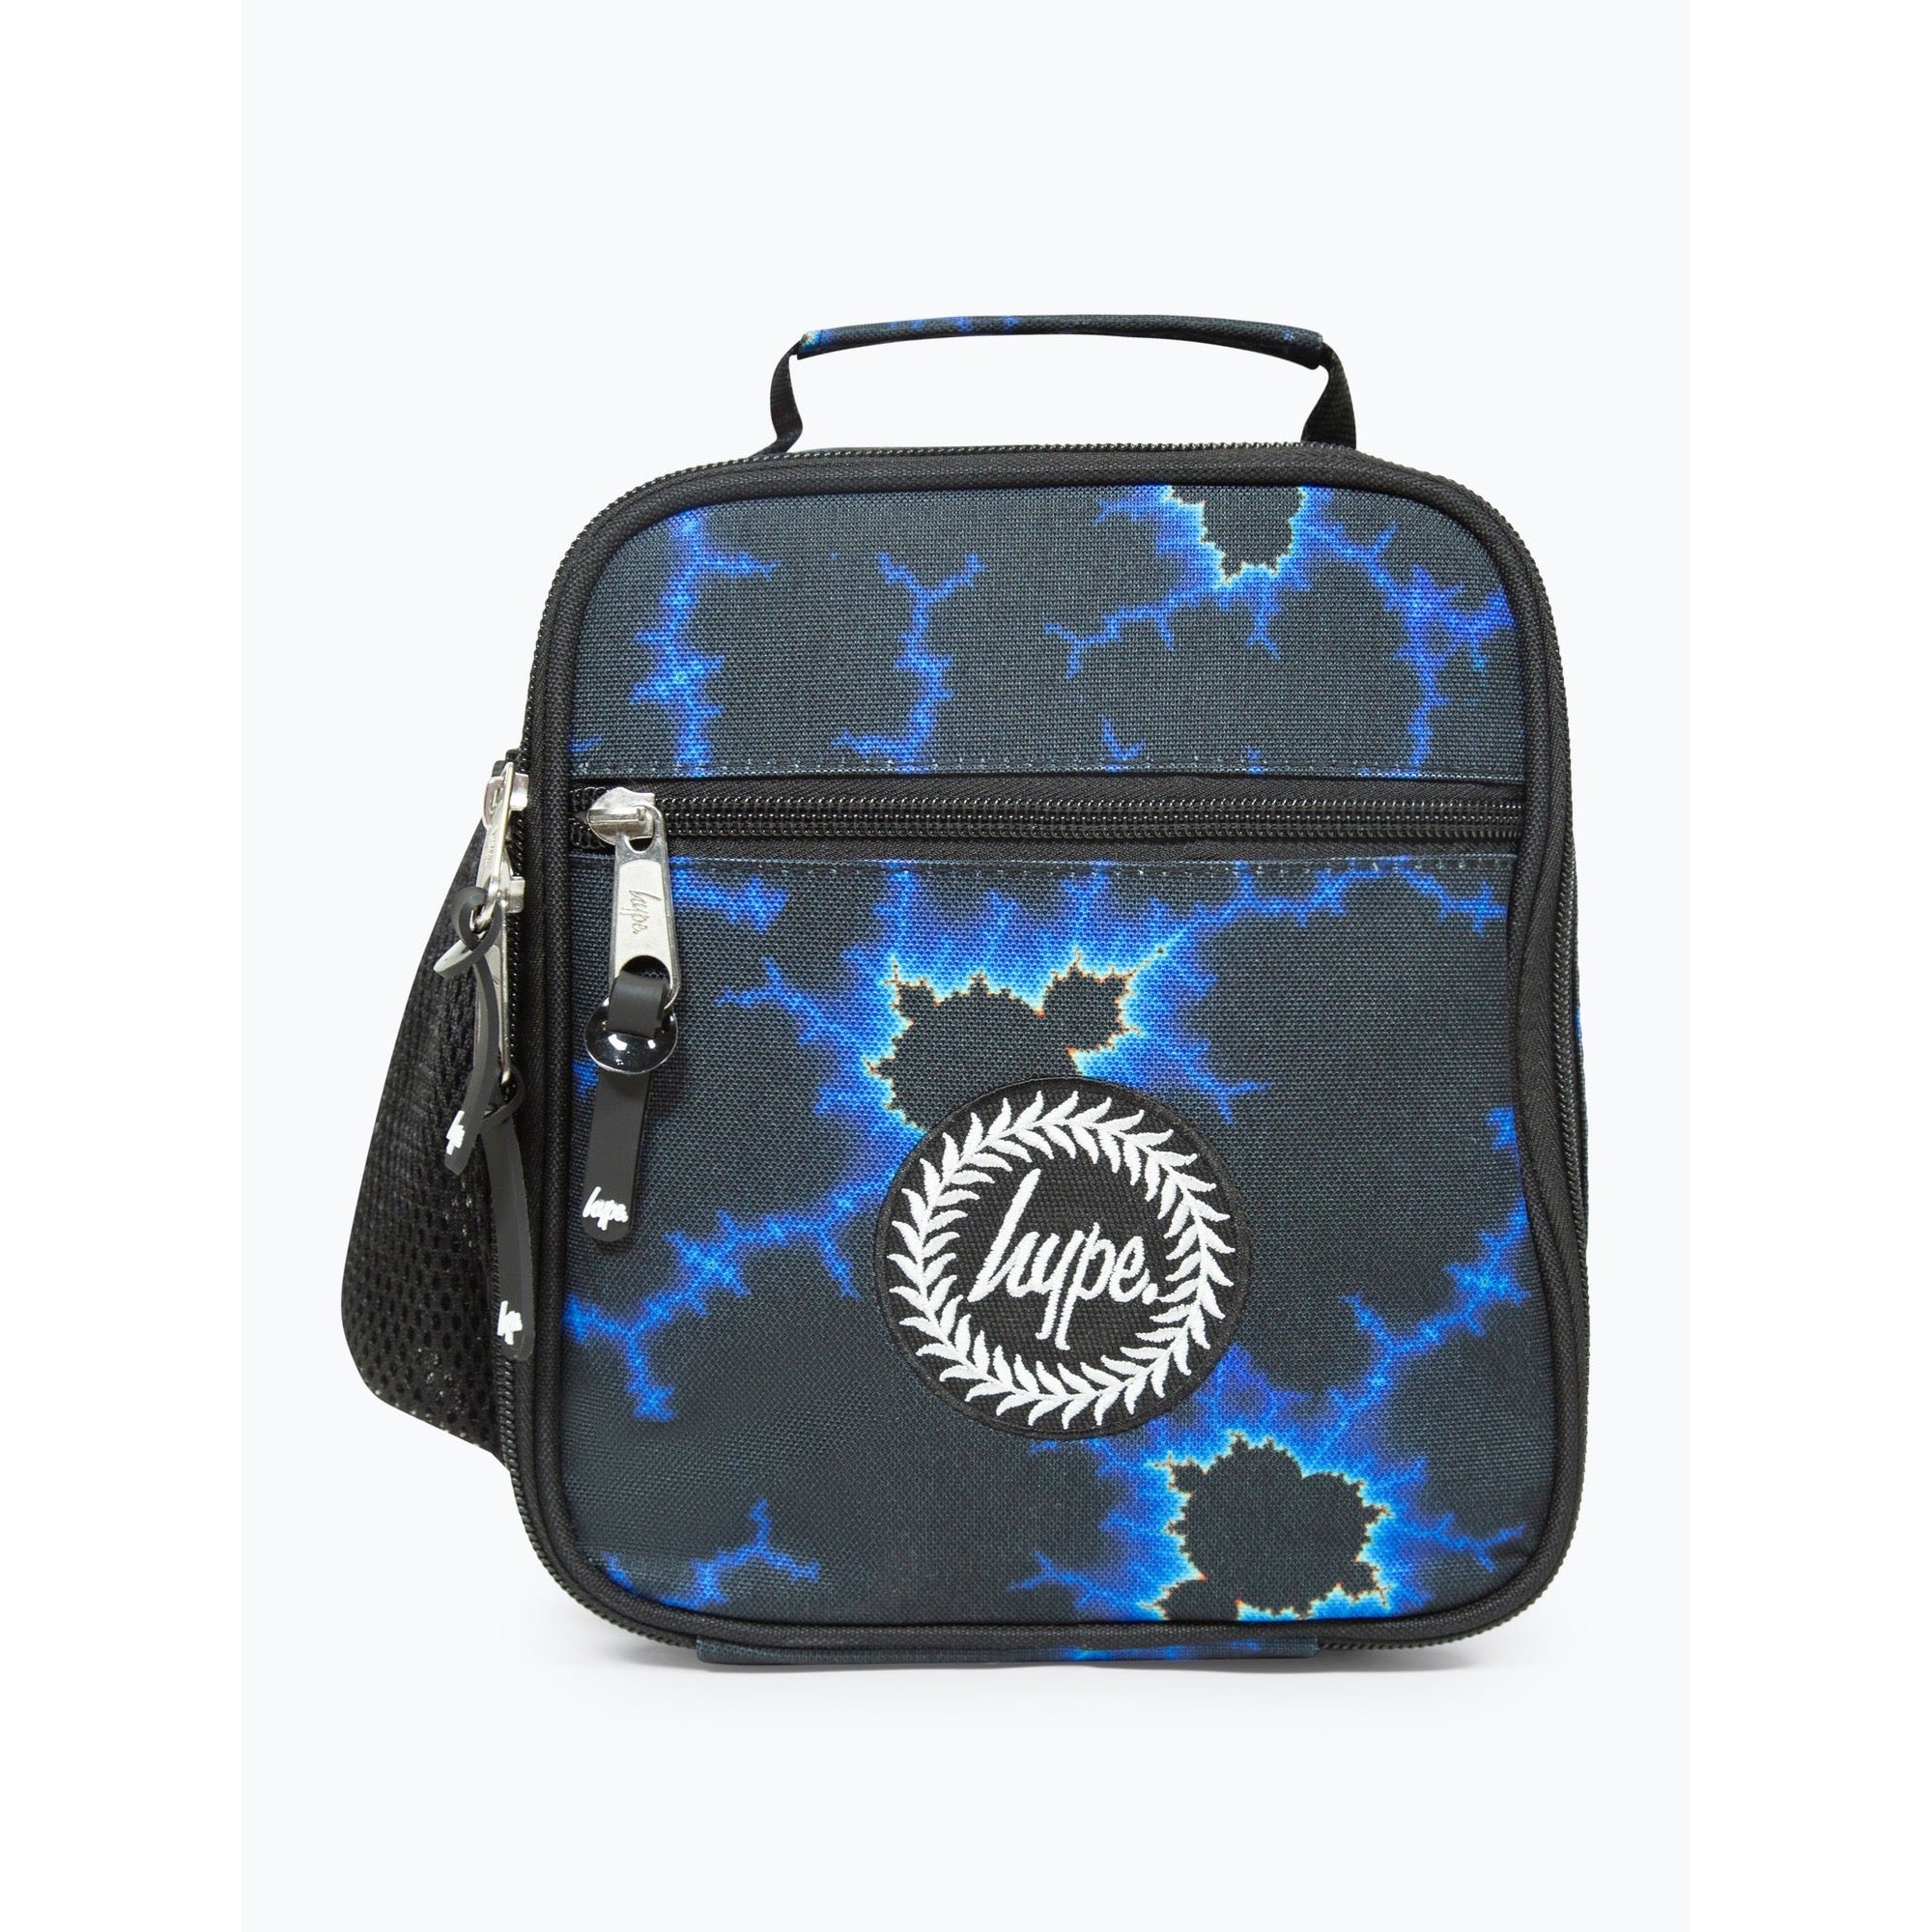 Hype Black Blue Lightening Lunch Bag Xtlr107 Accessories ONE SIZE / Multi